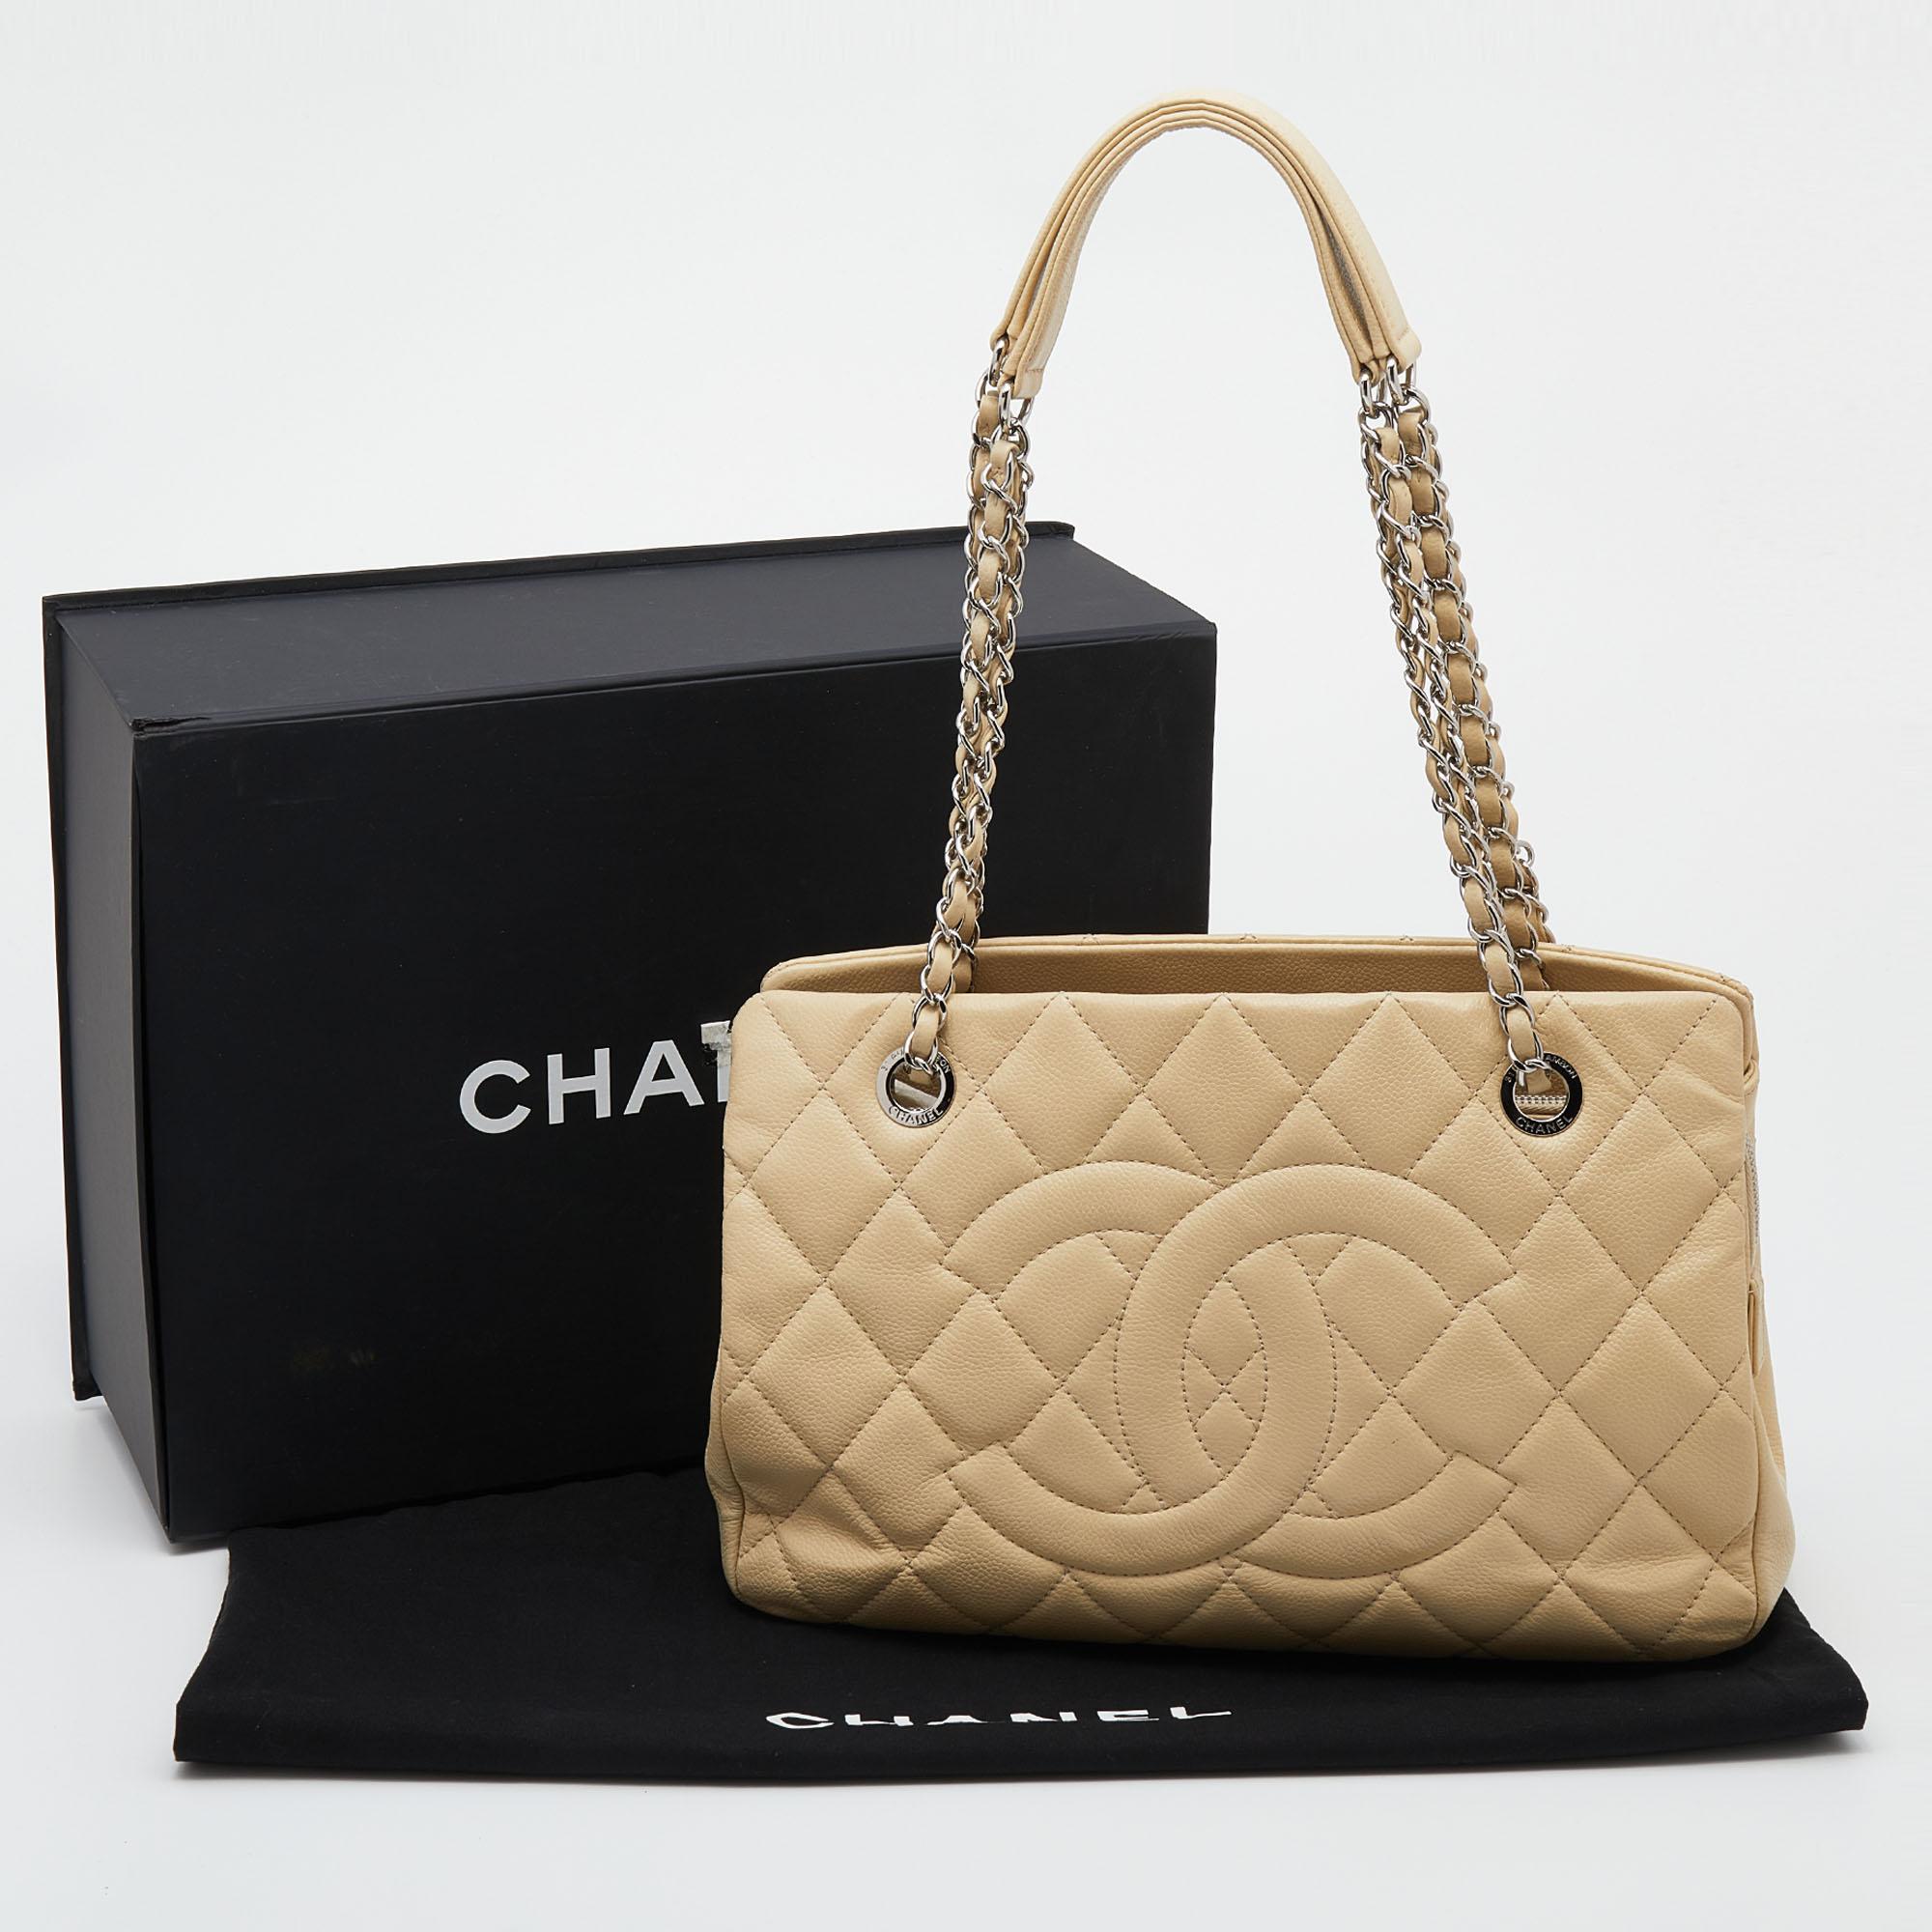 Chanel Cream Quilted Caviar Leather CC Timeless Shopper Tote 4